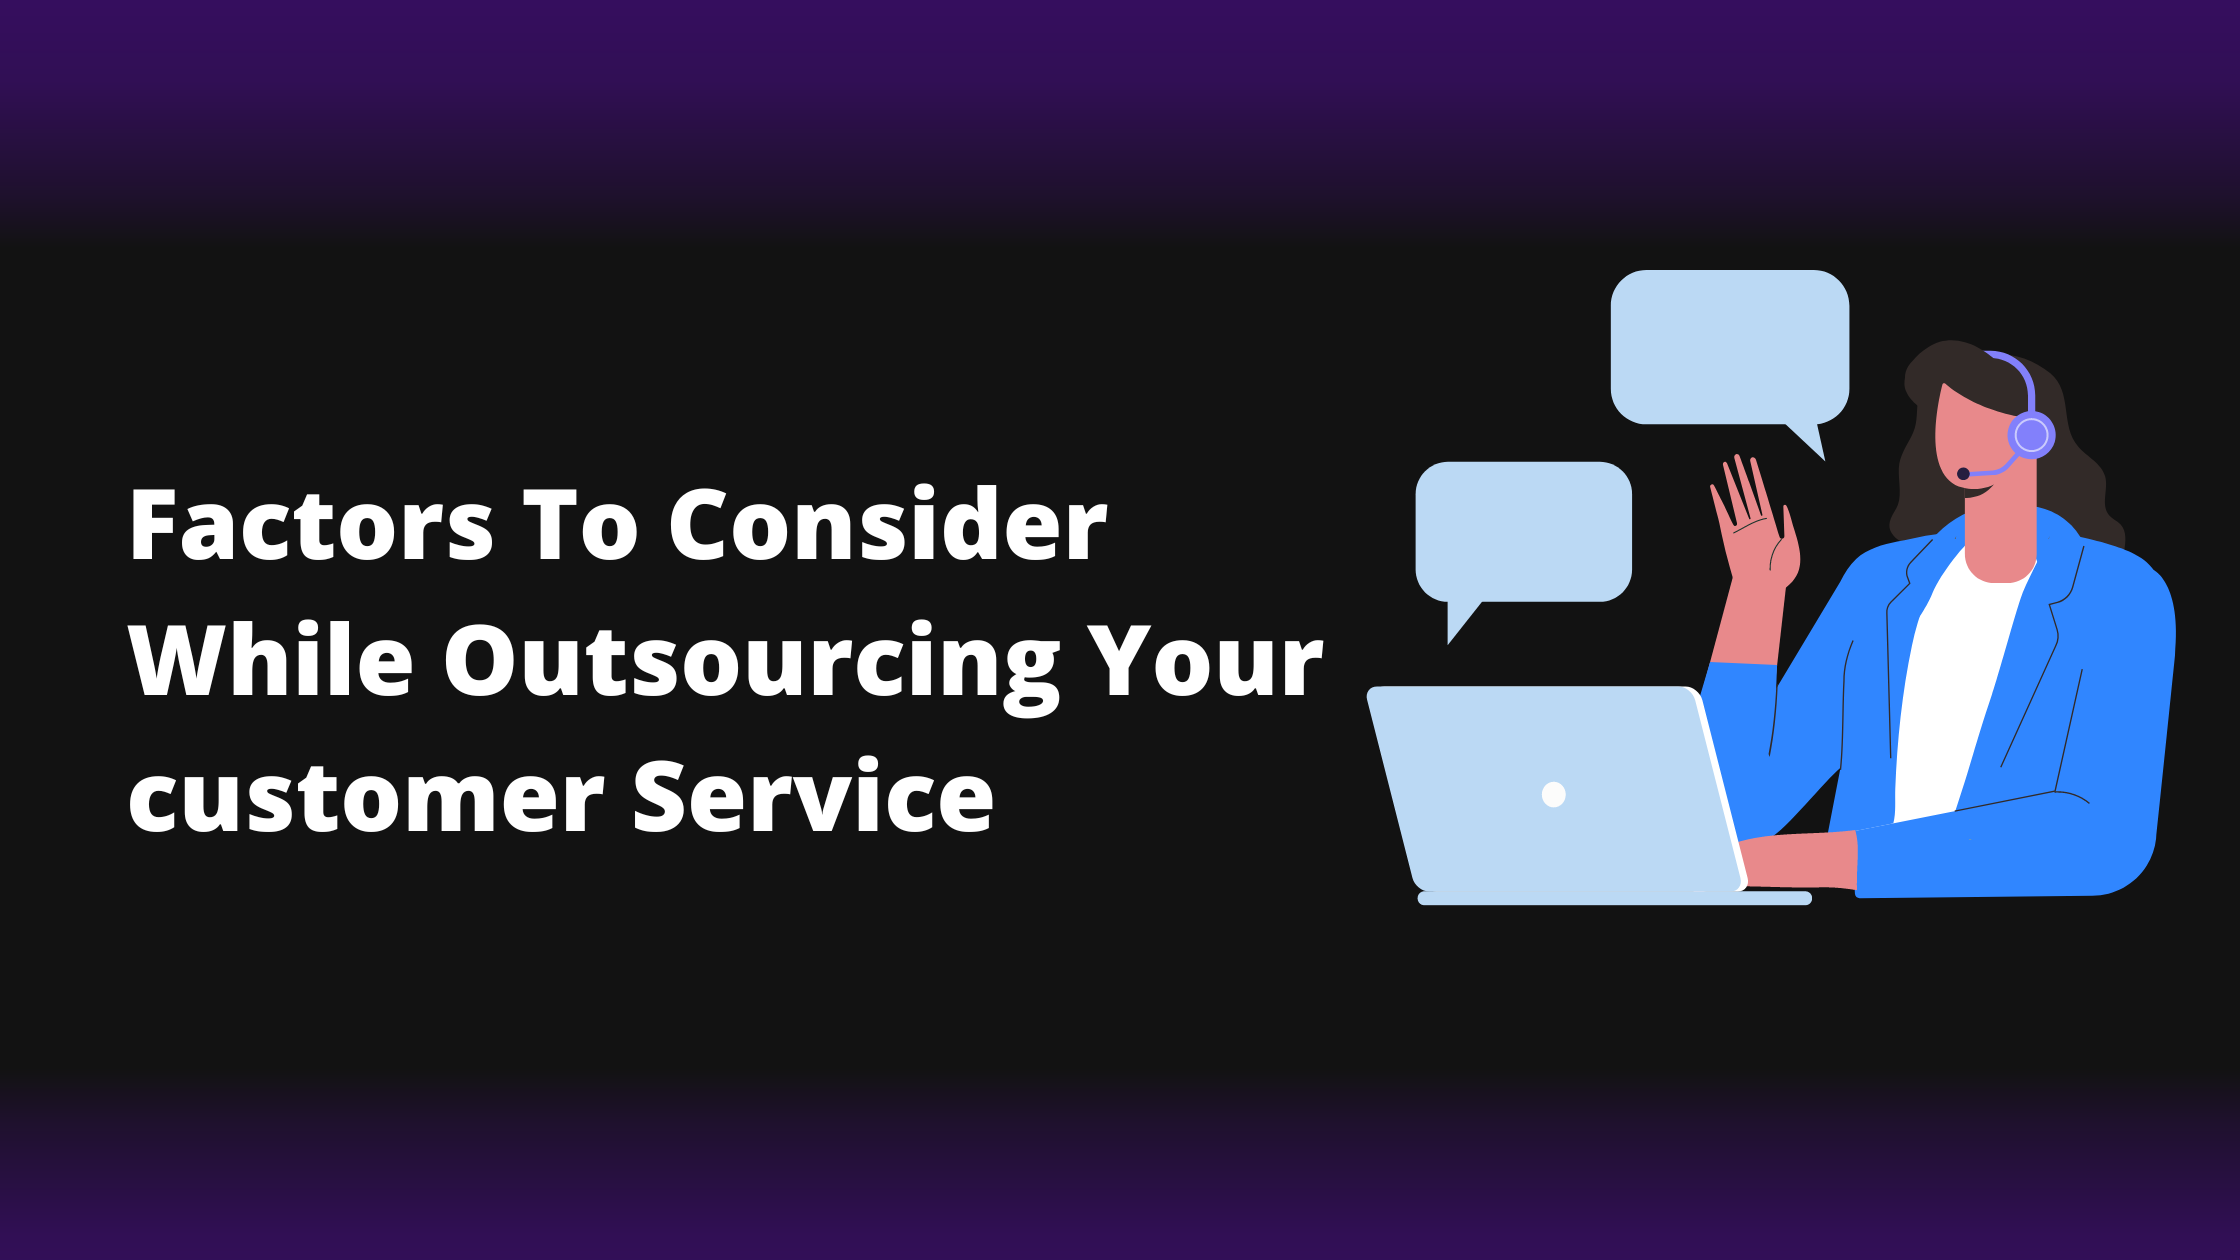 Factors to consider while outsourcing your customer service